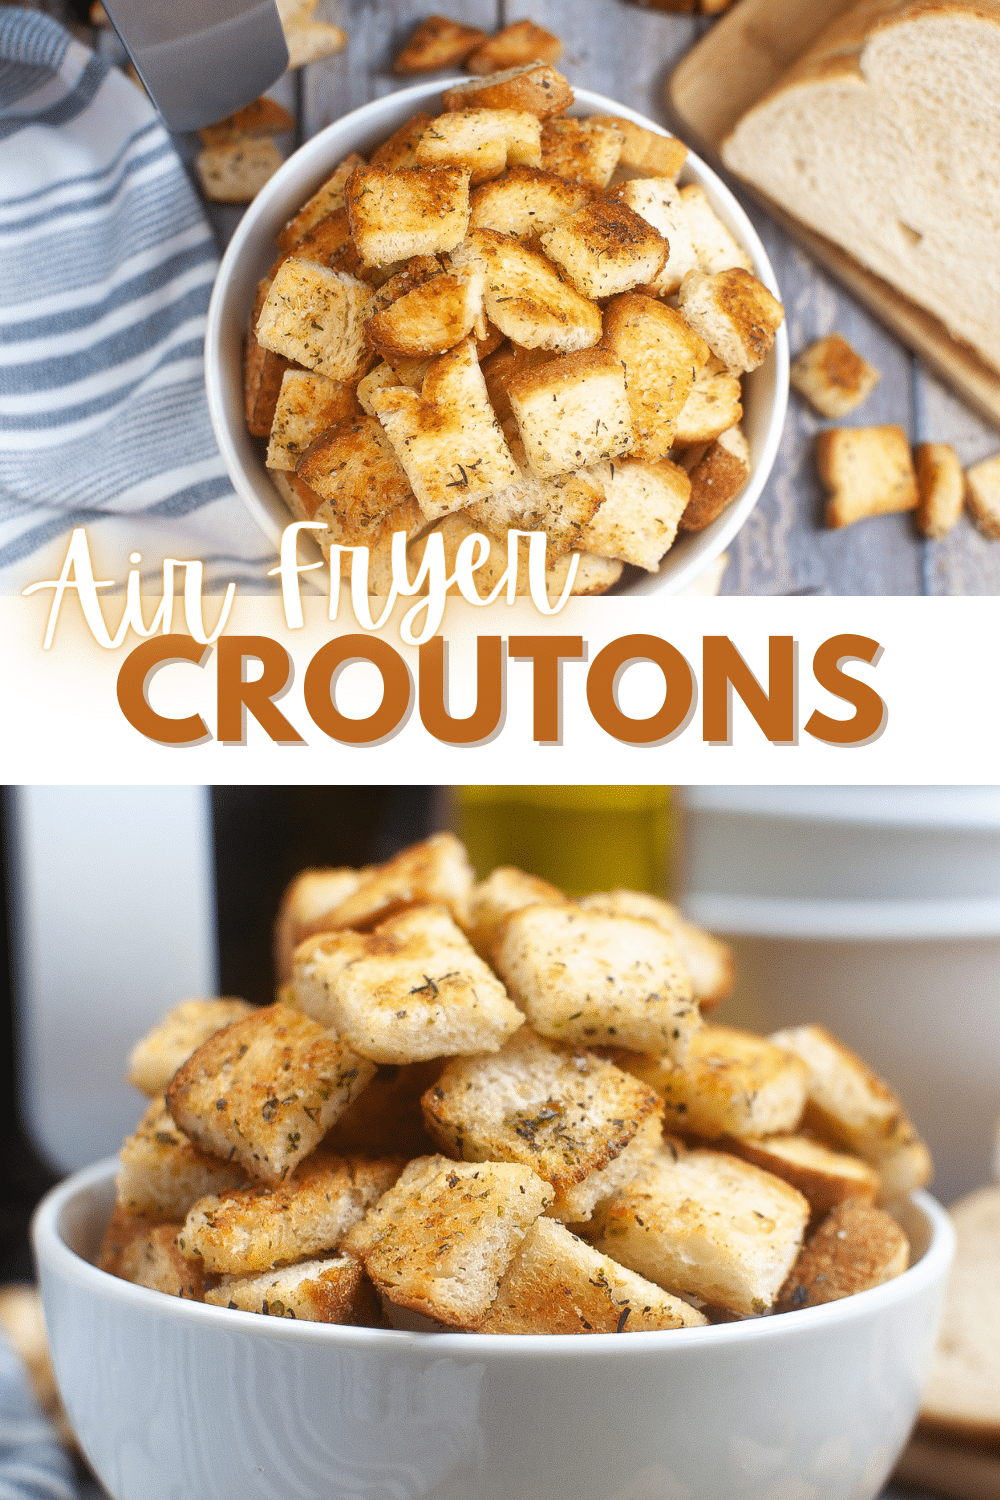 These Air Fryer Croutons are the perfect way to add crunch and flavor to salads, soups and casseroles. They're healthier than fried versions. #airfryercroutons #airfryer #croutons via @wondermomwannab